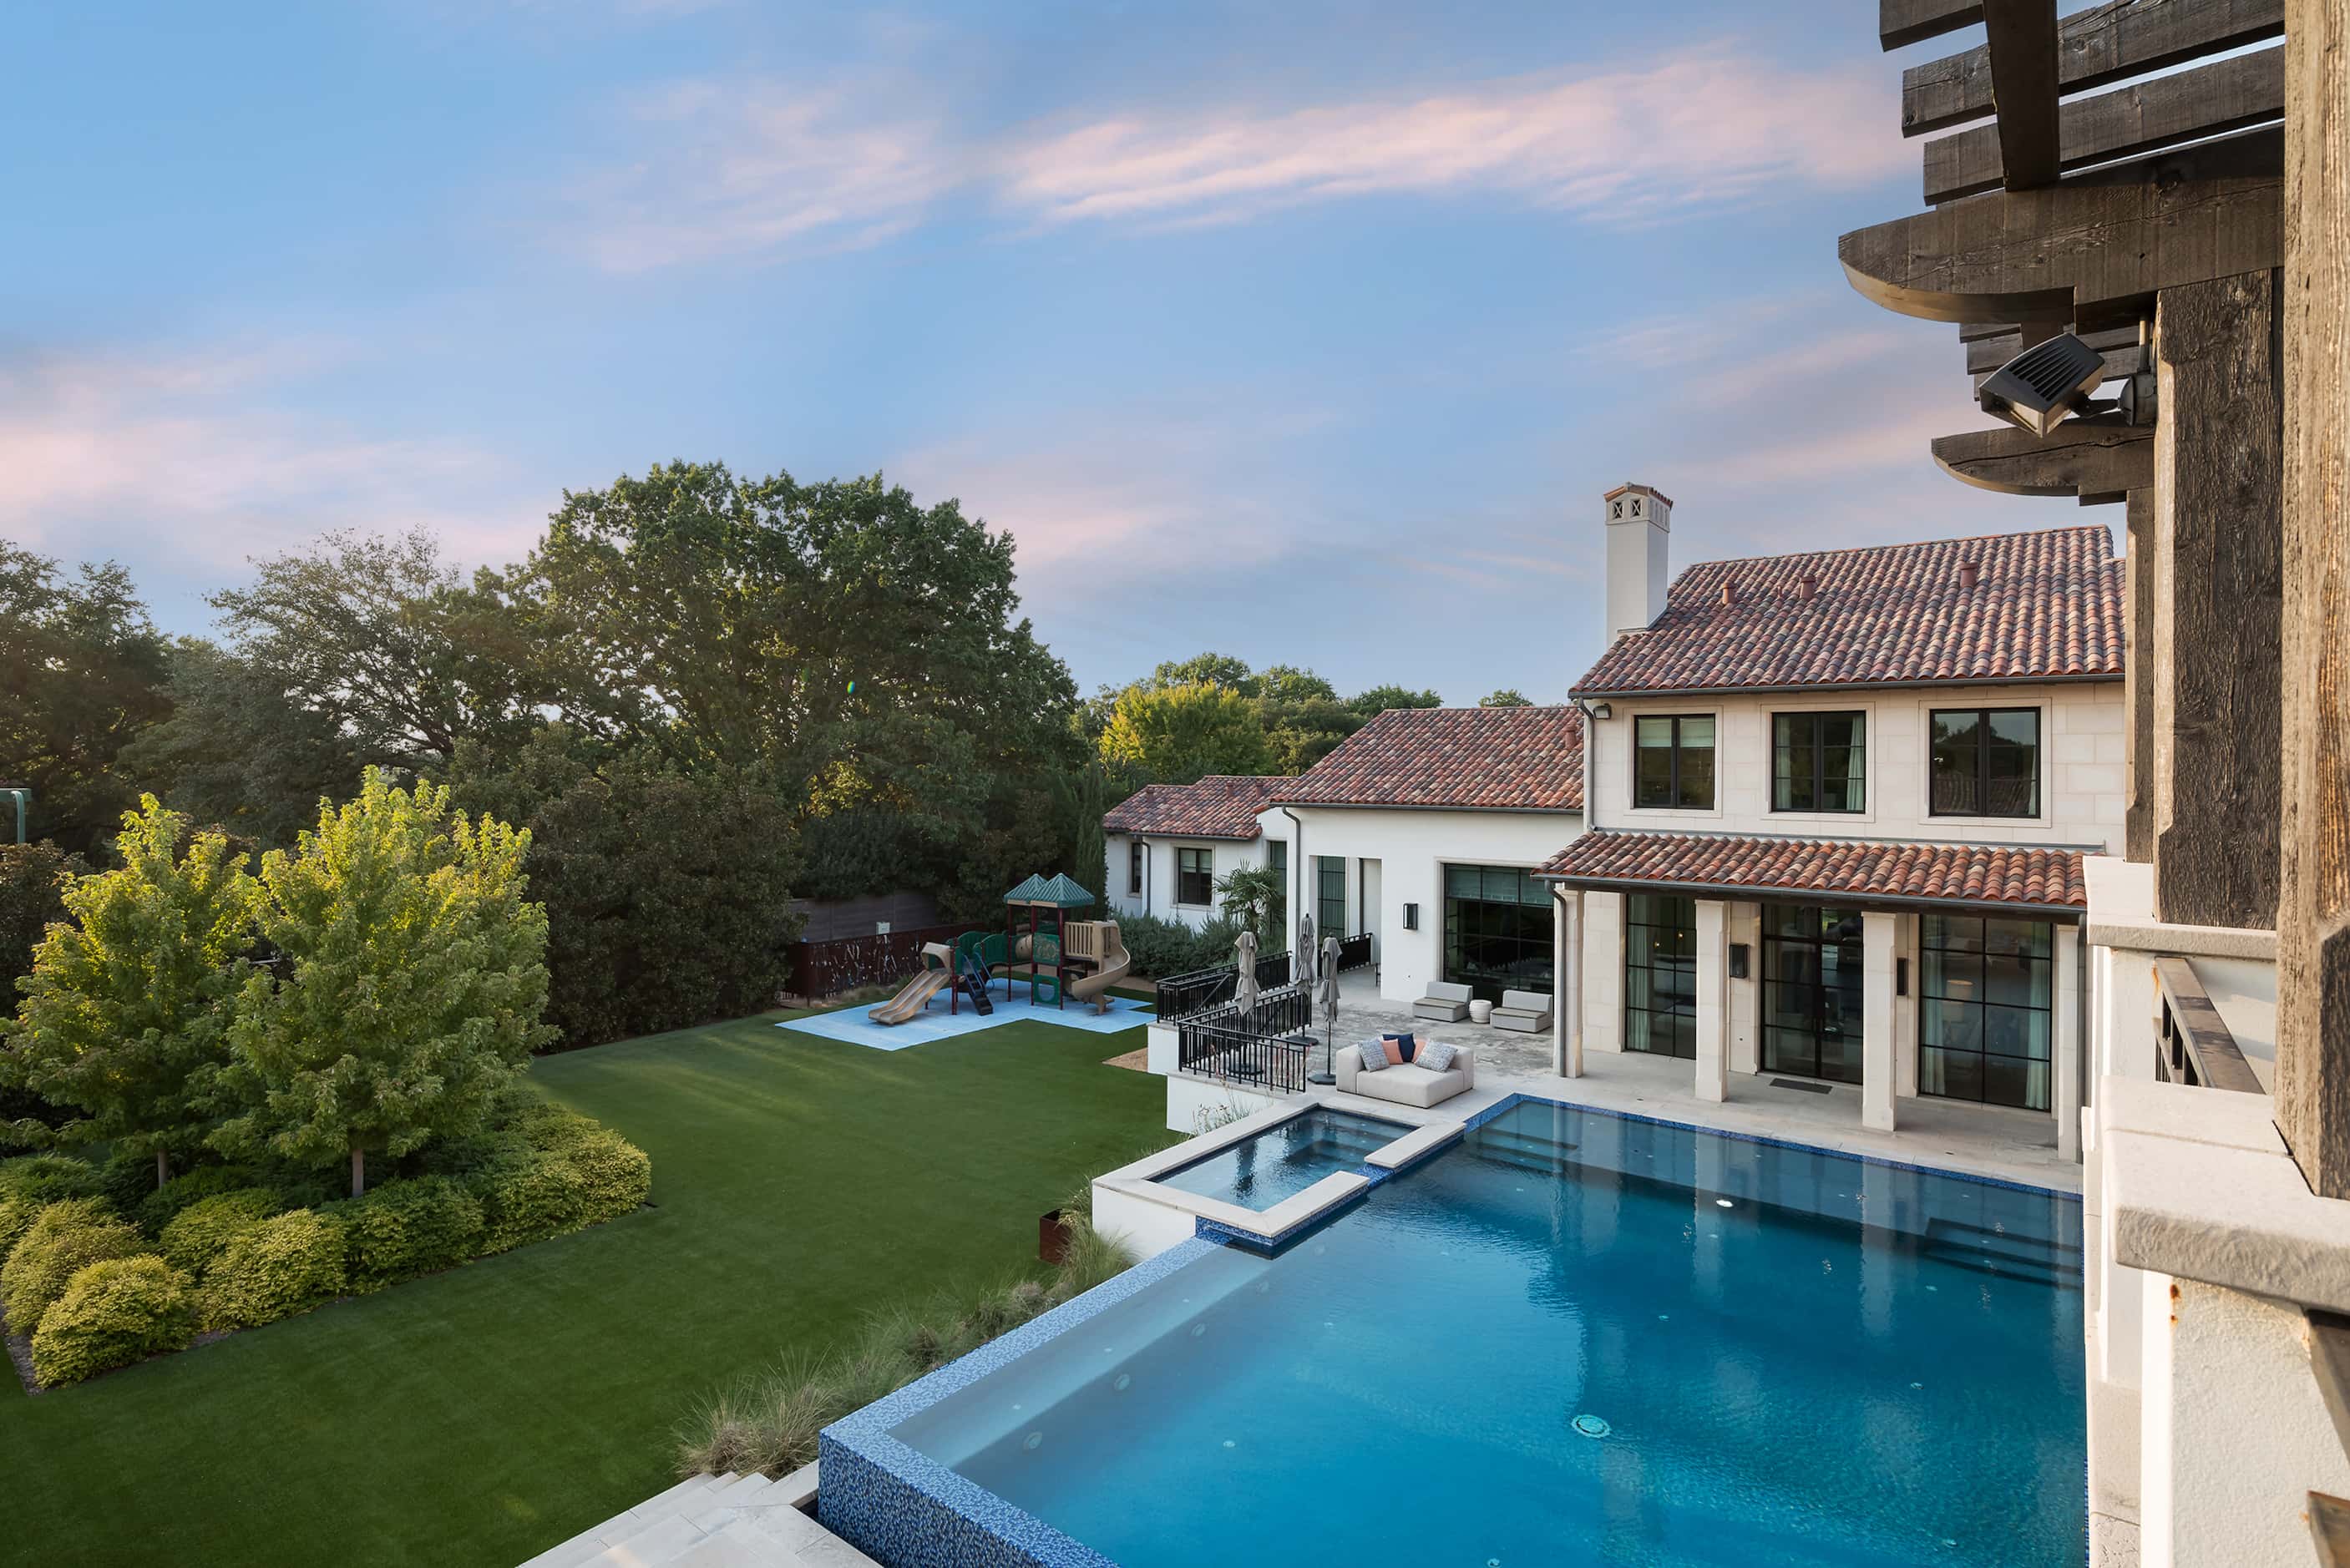 A high-level view of the property's backyard shows the outdoor living spaces, a pool and a...